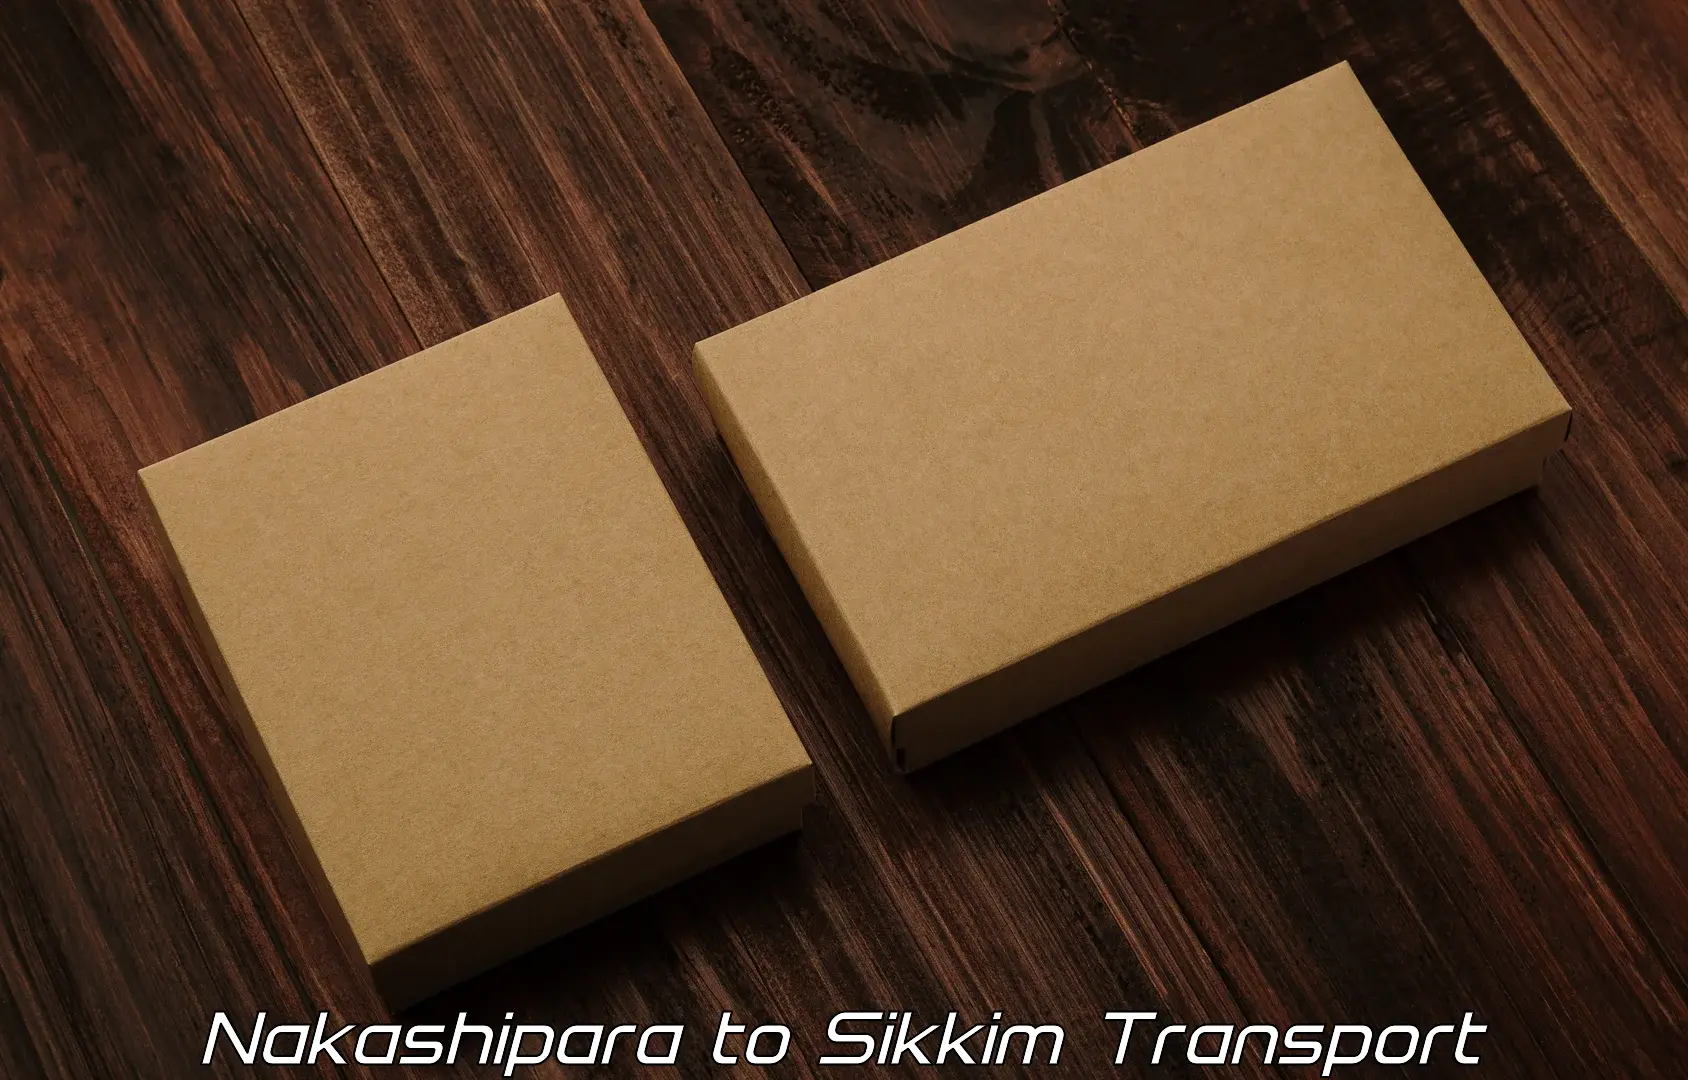 Container transport service in Nakashipara to East Sikkim